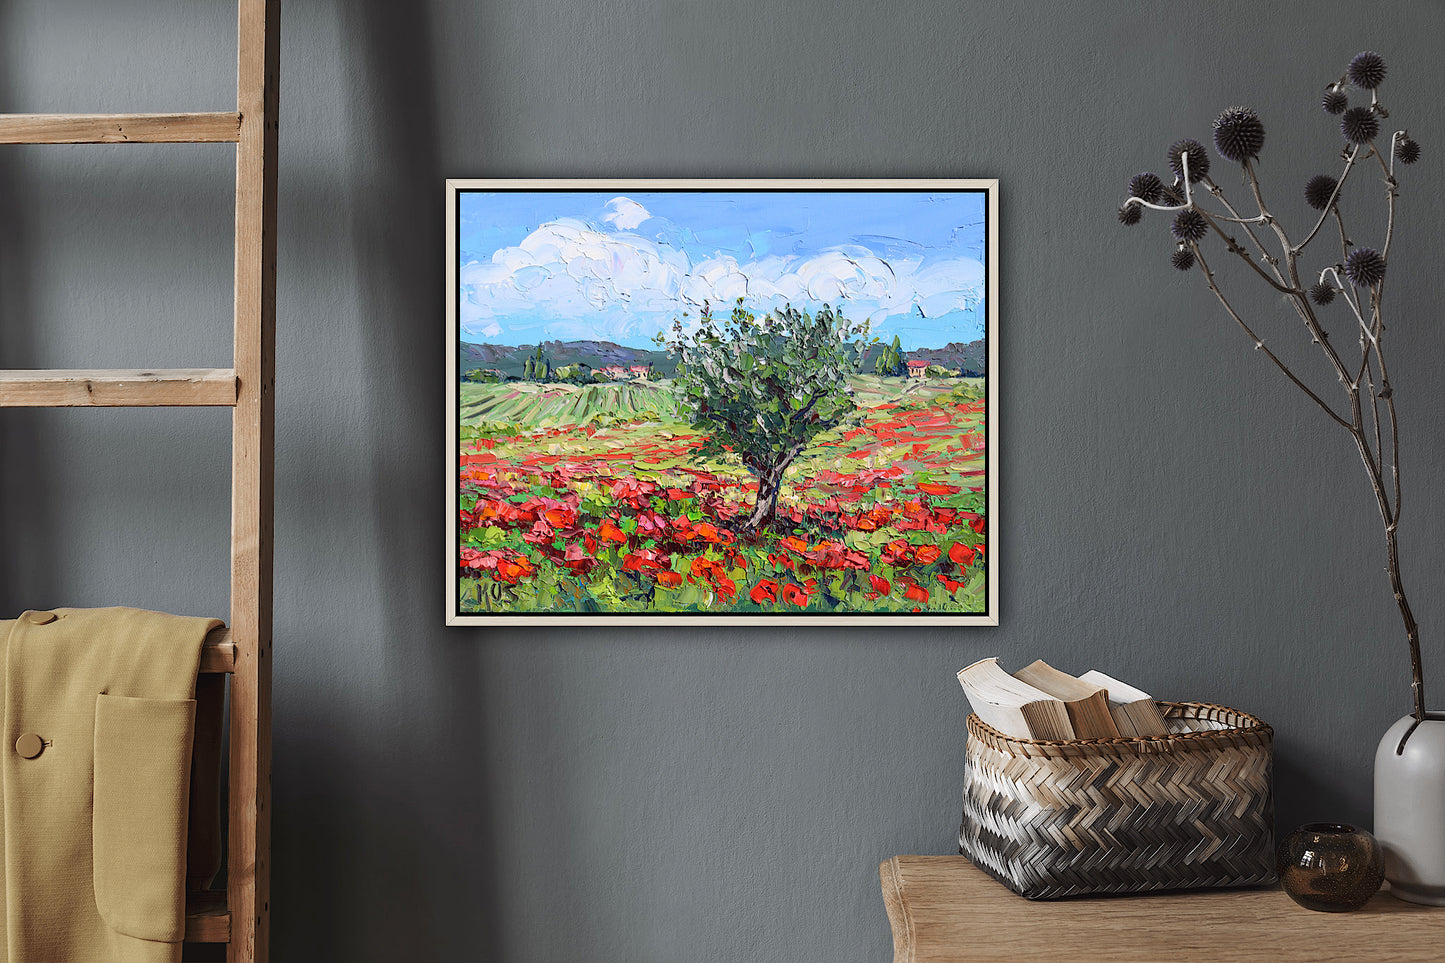 Dreaming Of Tuscany, Original 11" x 14" Italian Tuscan Landscape Oil Painting With Red Poppies And Olive Trees